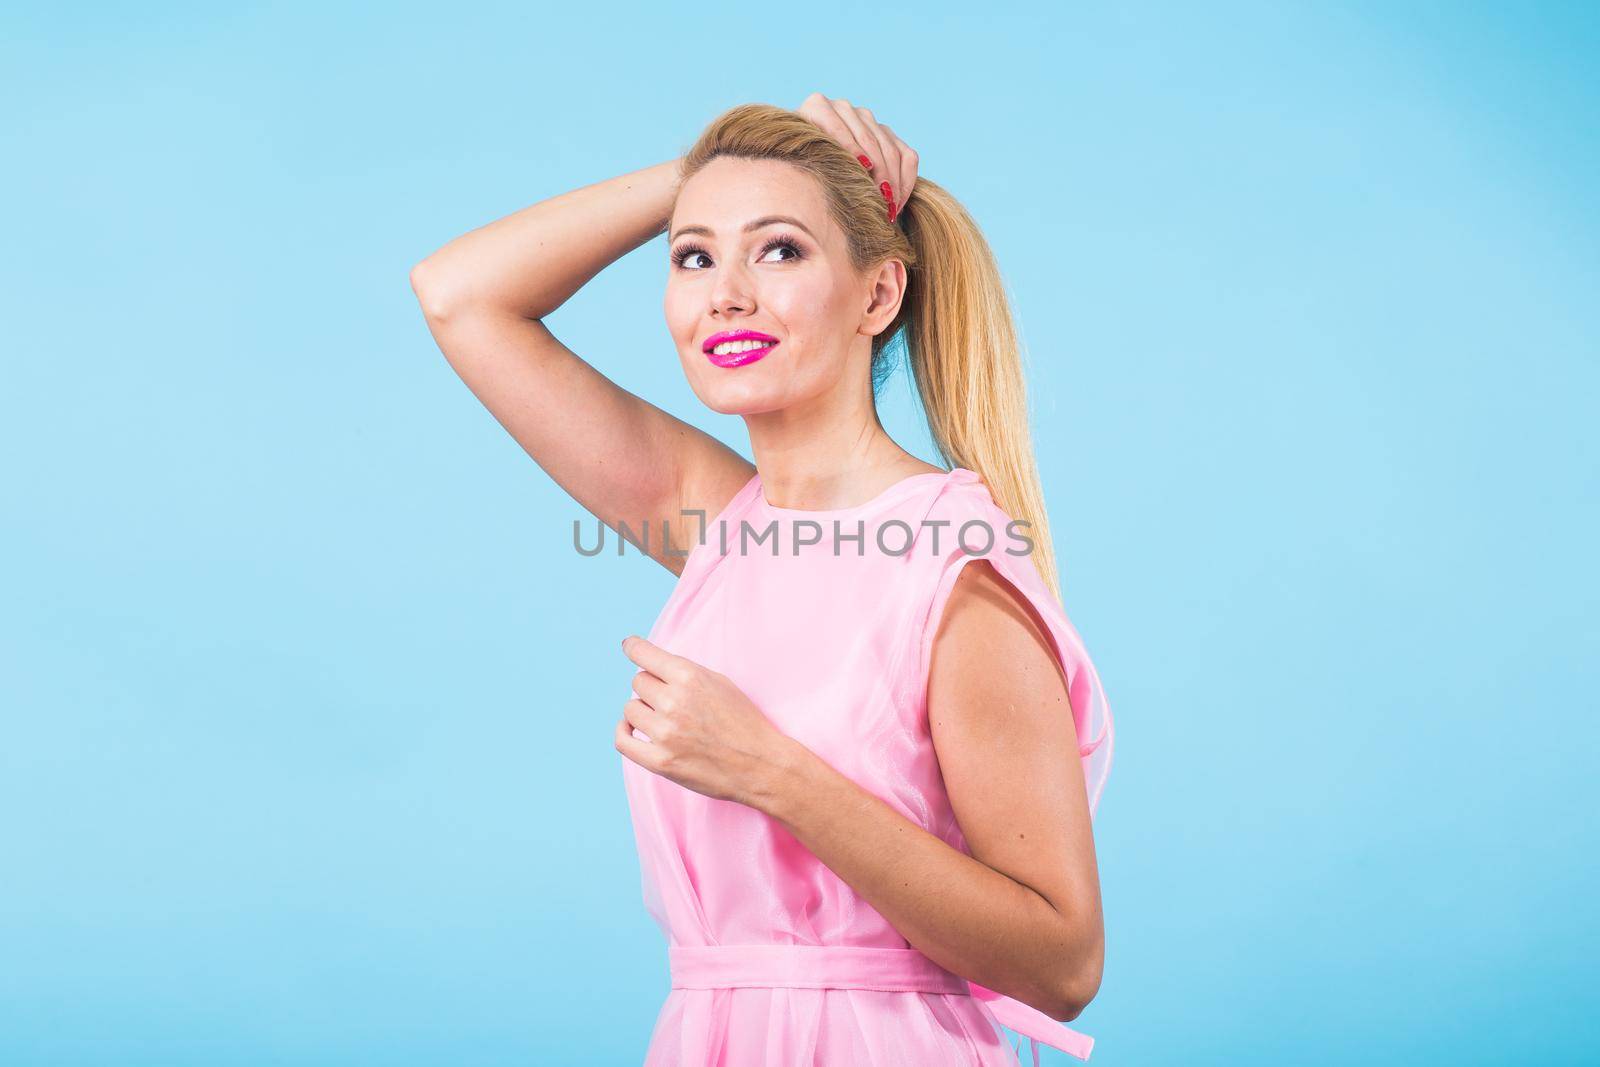 Beautiful woman with long straight blond hair. Fashion model posing at studio on blue background by Satura86